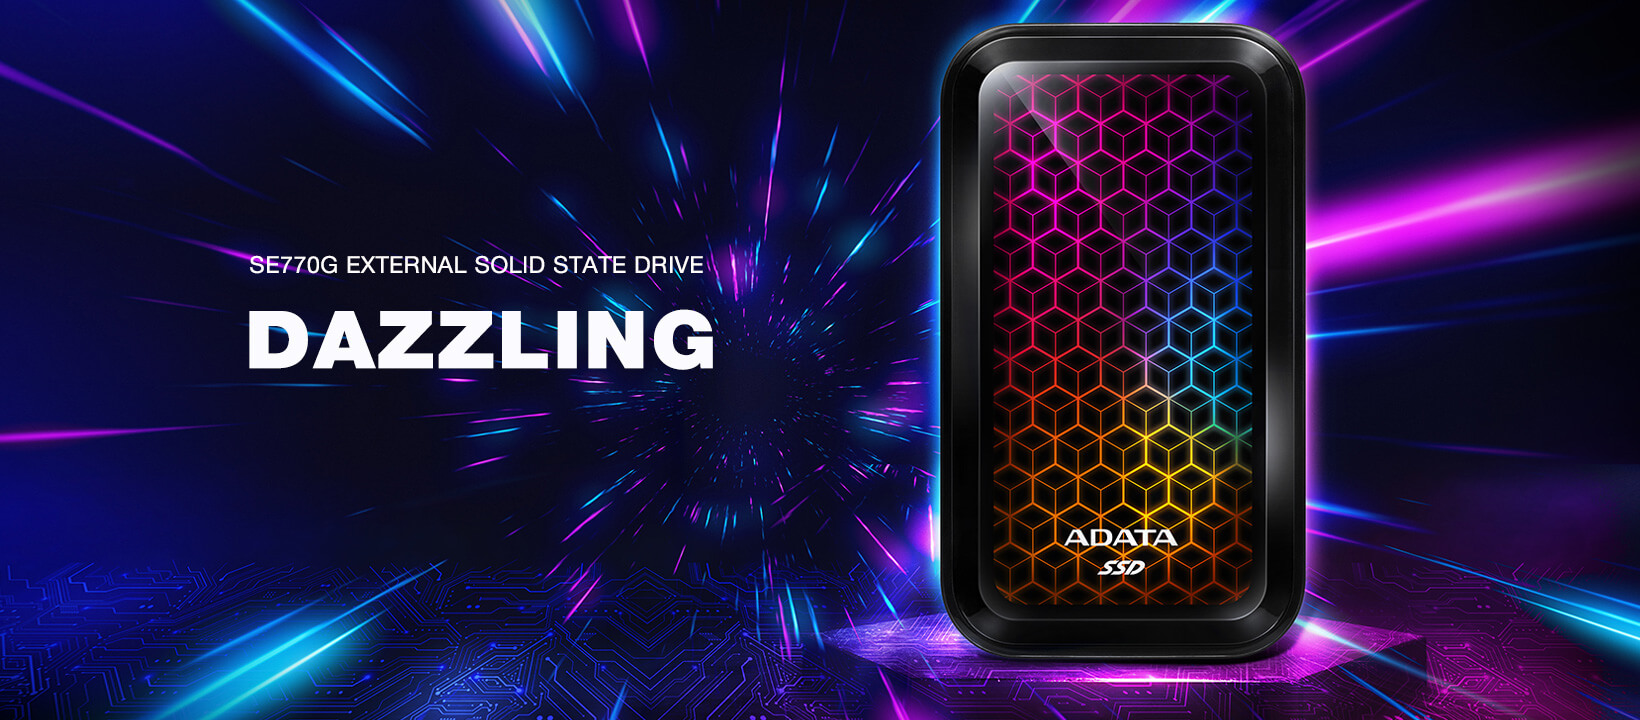 ADATA SE770G External Solid State Drive Dazzling